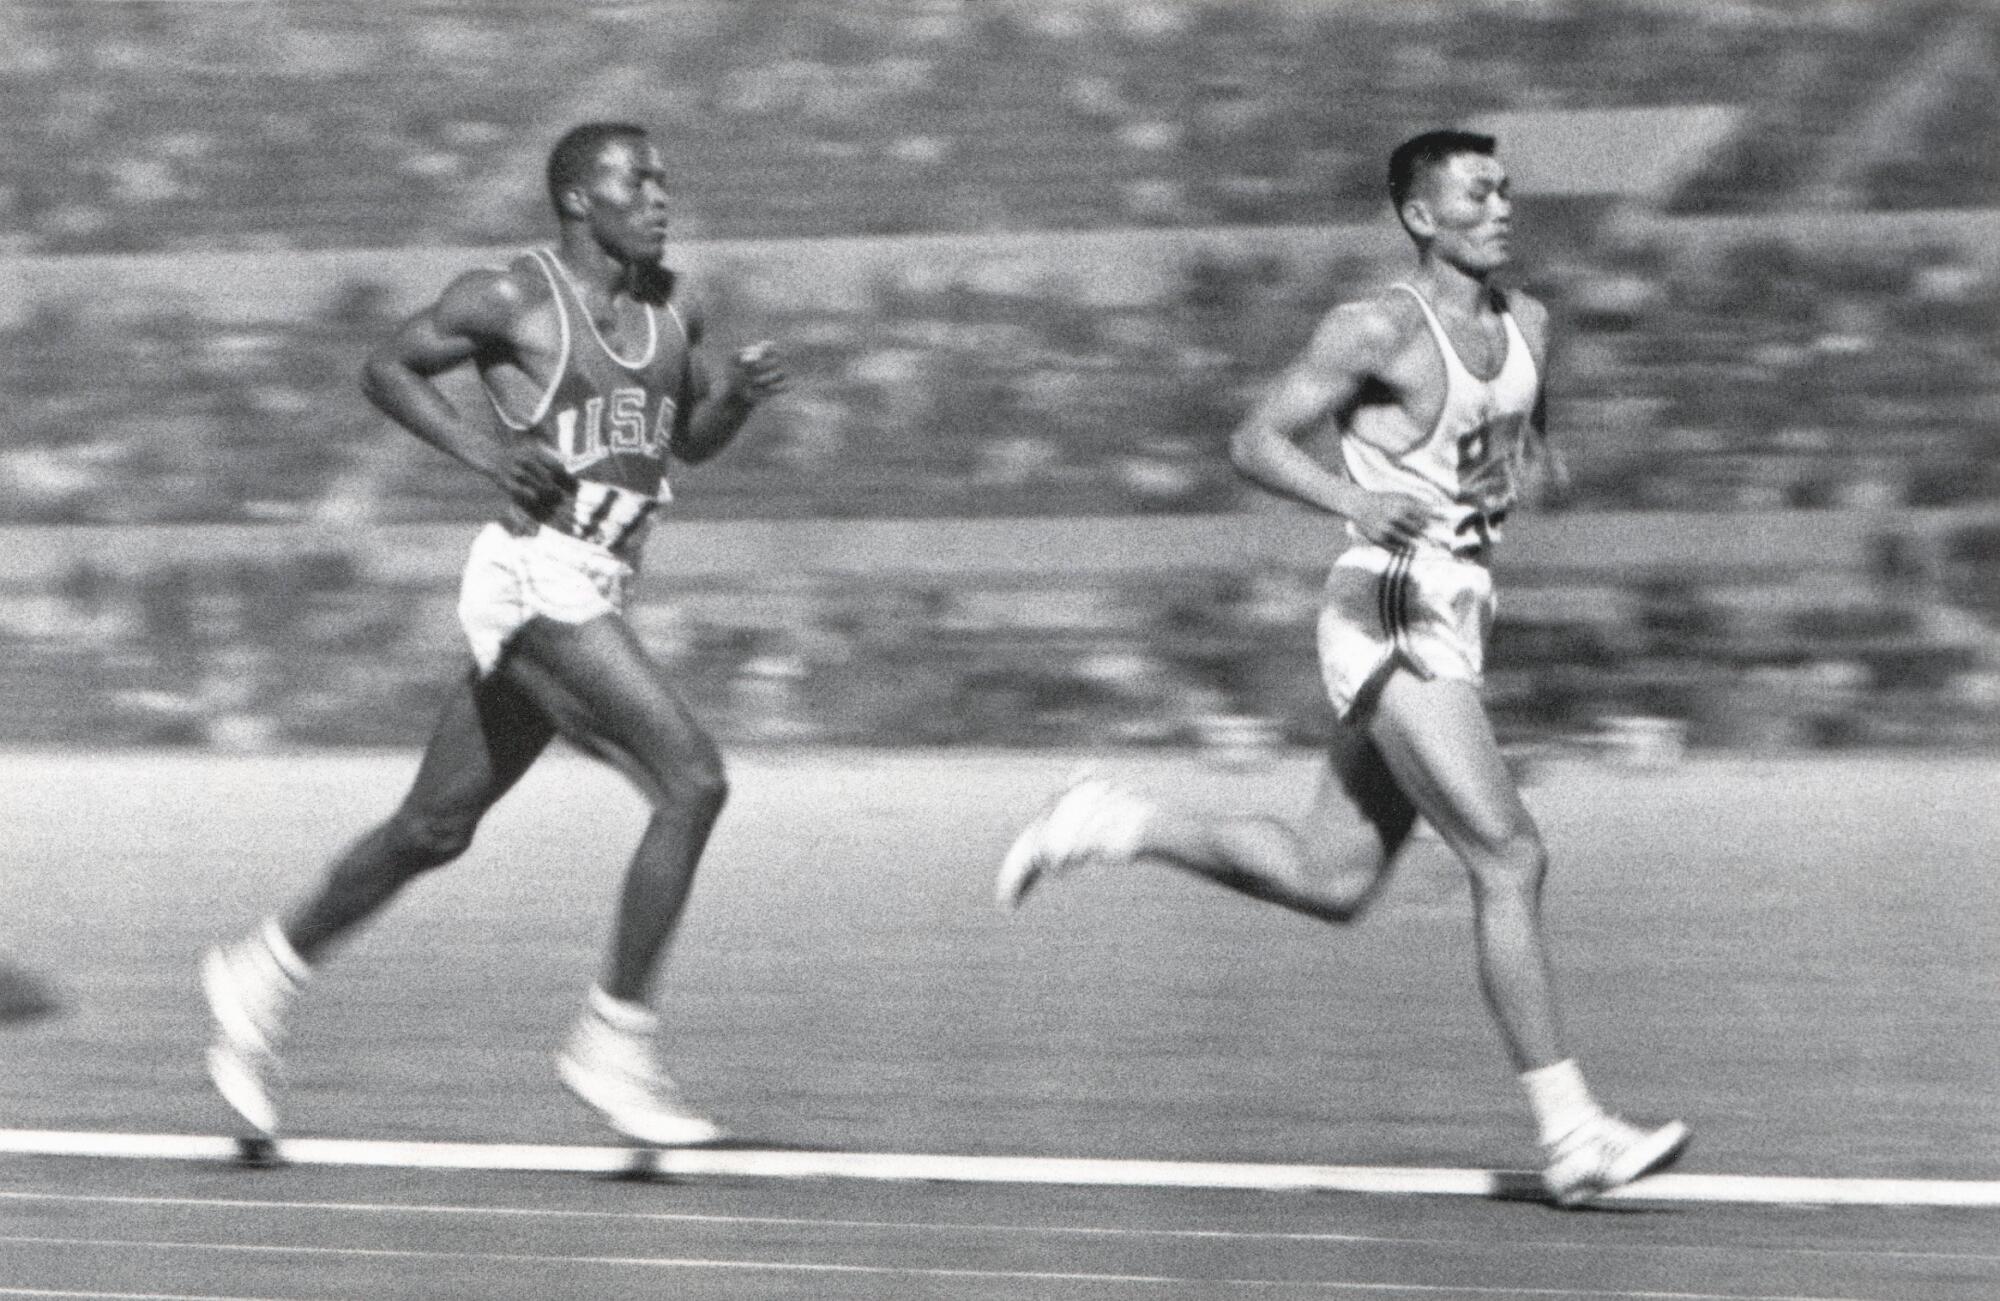 Rafer Johnson of the United States competes against Yang Chuan-kwang of China in the 1,500-meters portion of the decathlon.